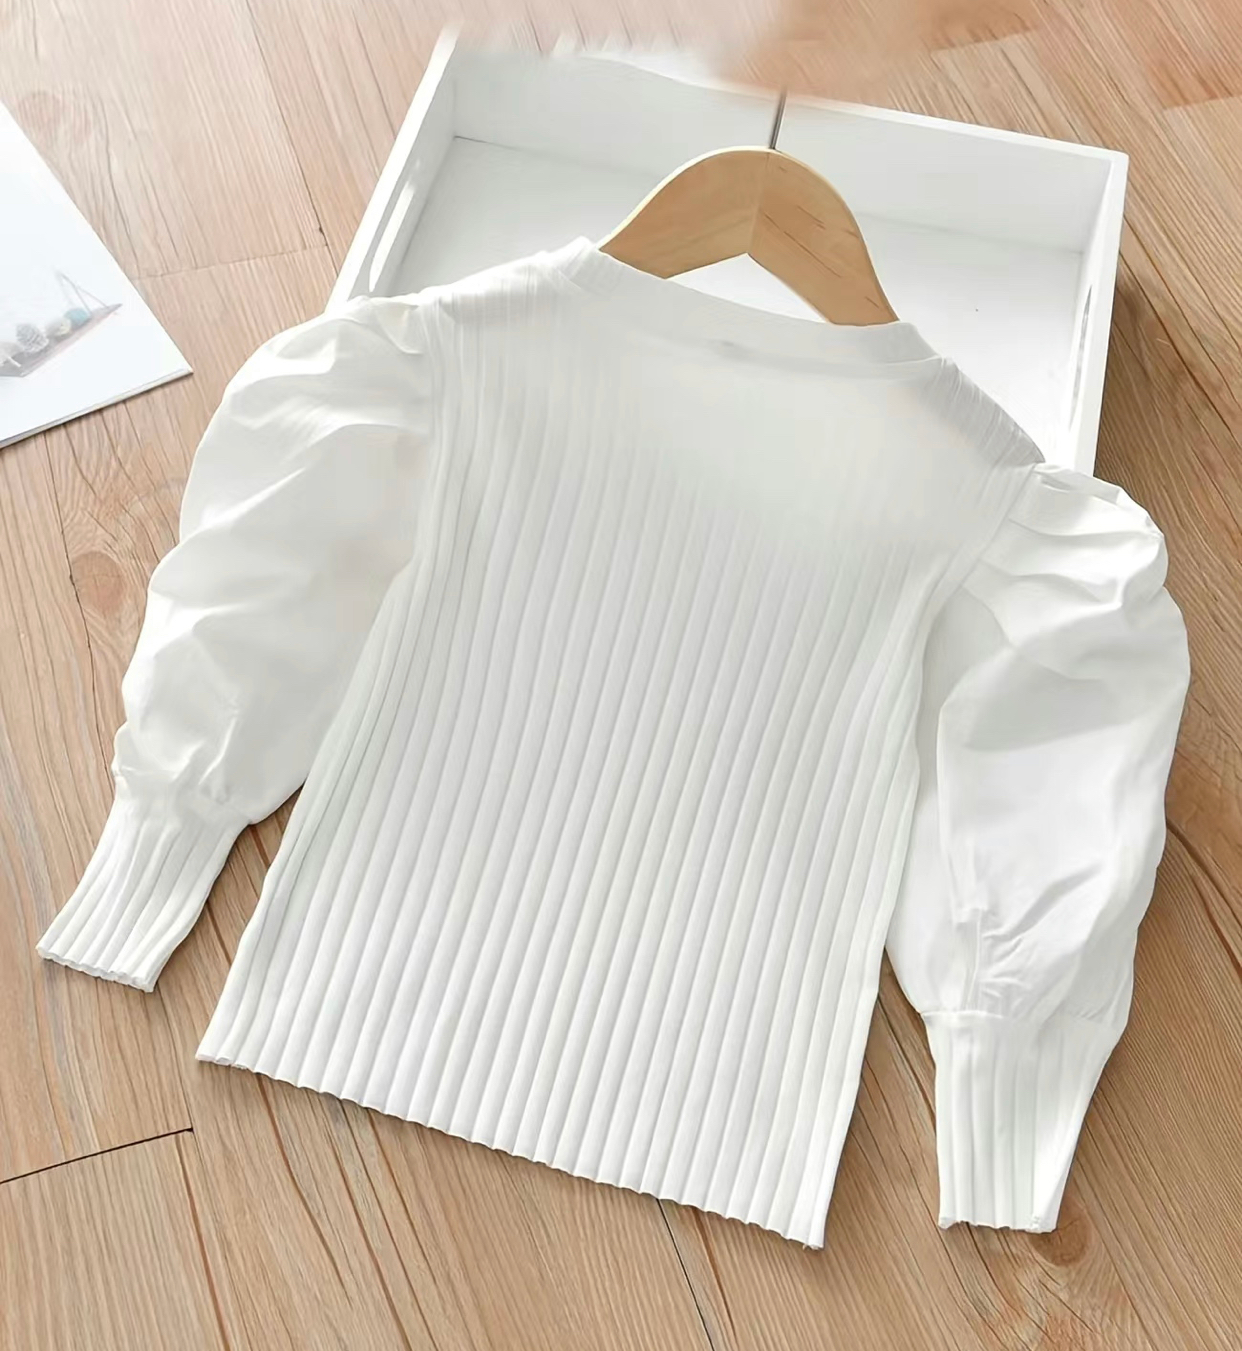 Girls Ribbed Puff Sleeve Top